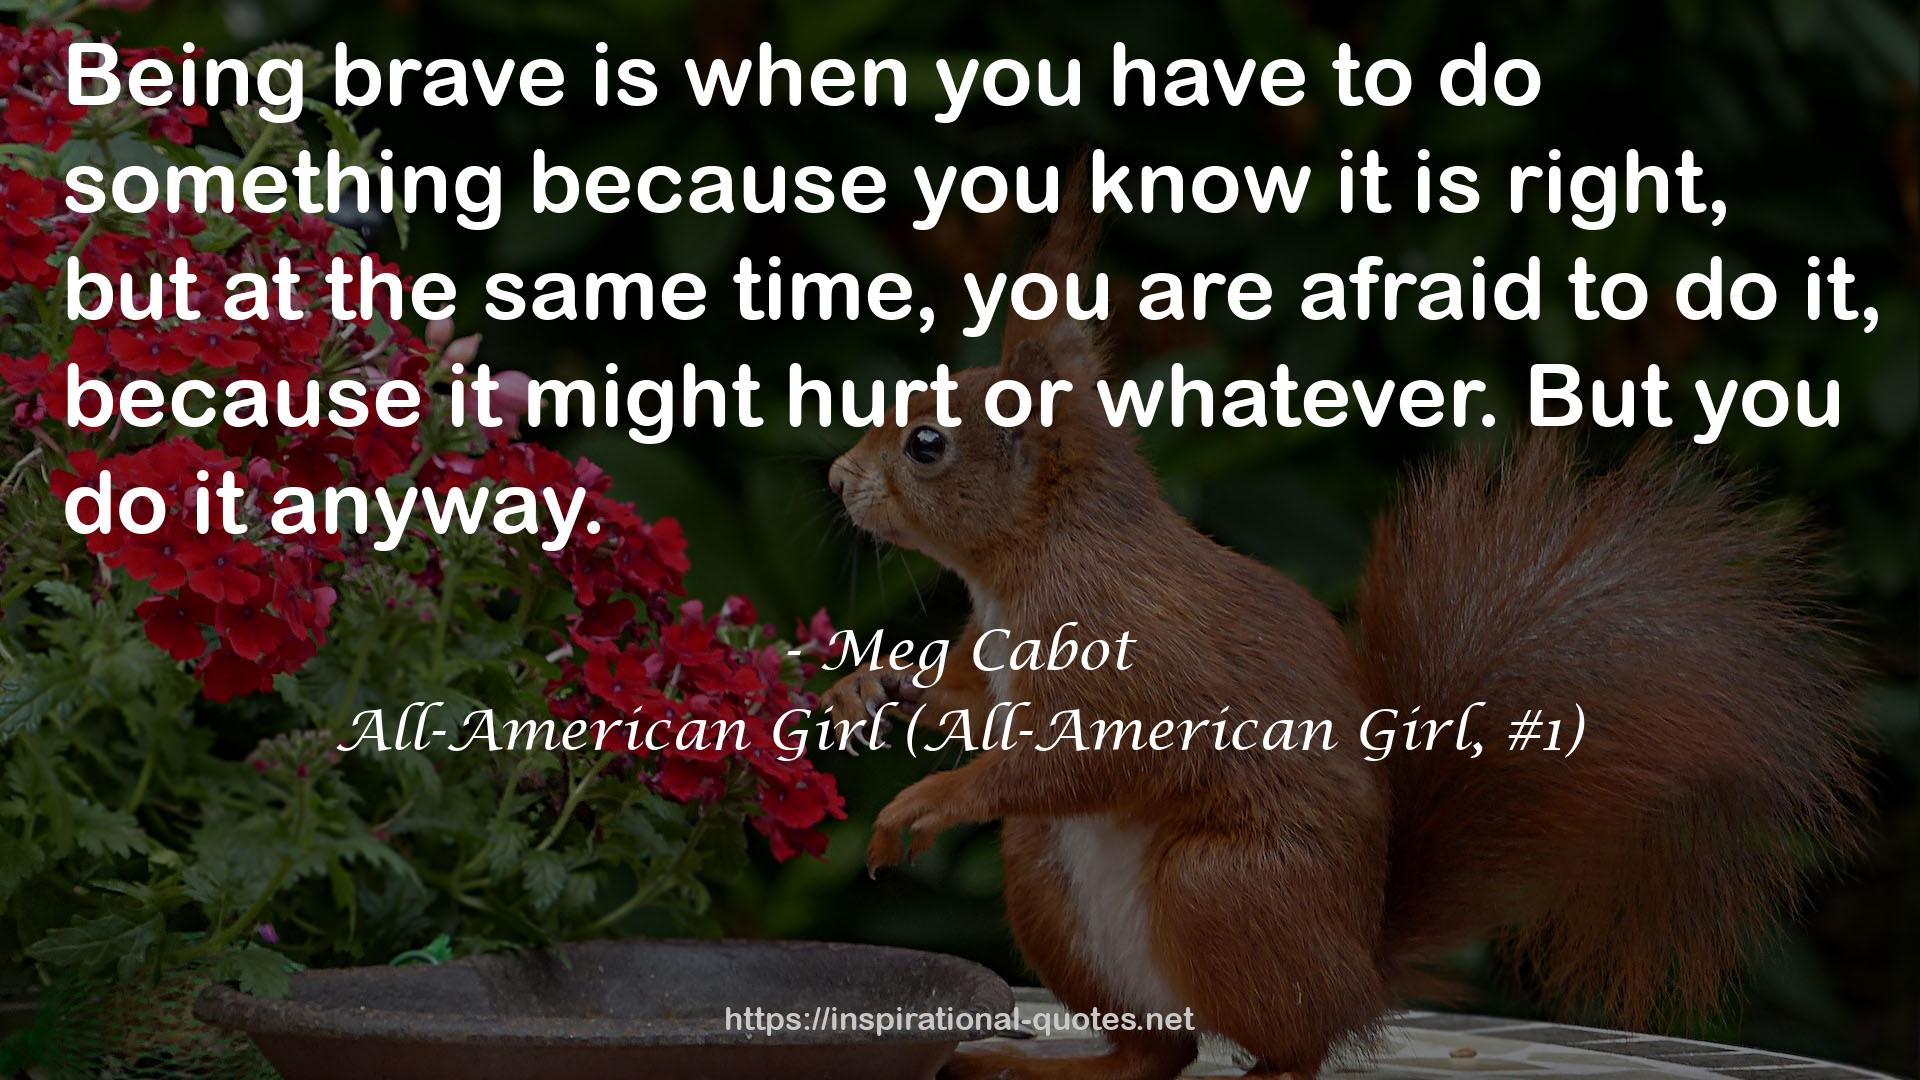 All-American Girl (All-American Girl, #1) QUOTES